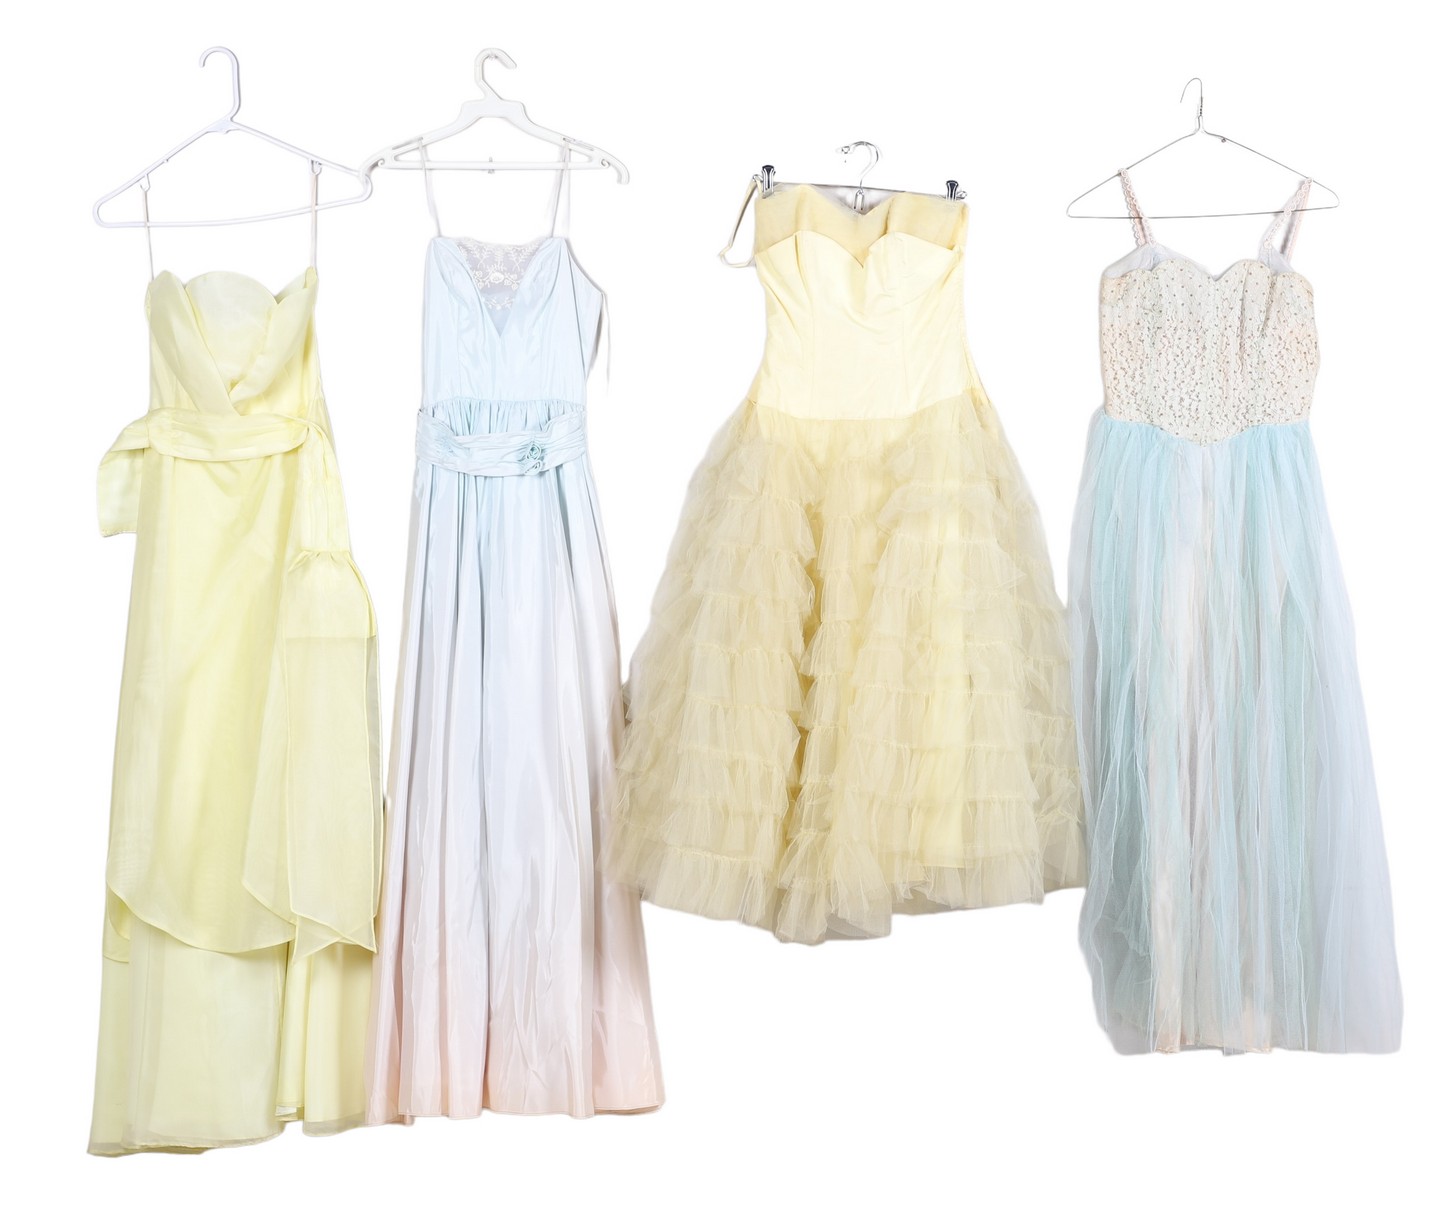  4 50 s 60s Party dresses to include 27a745